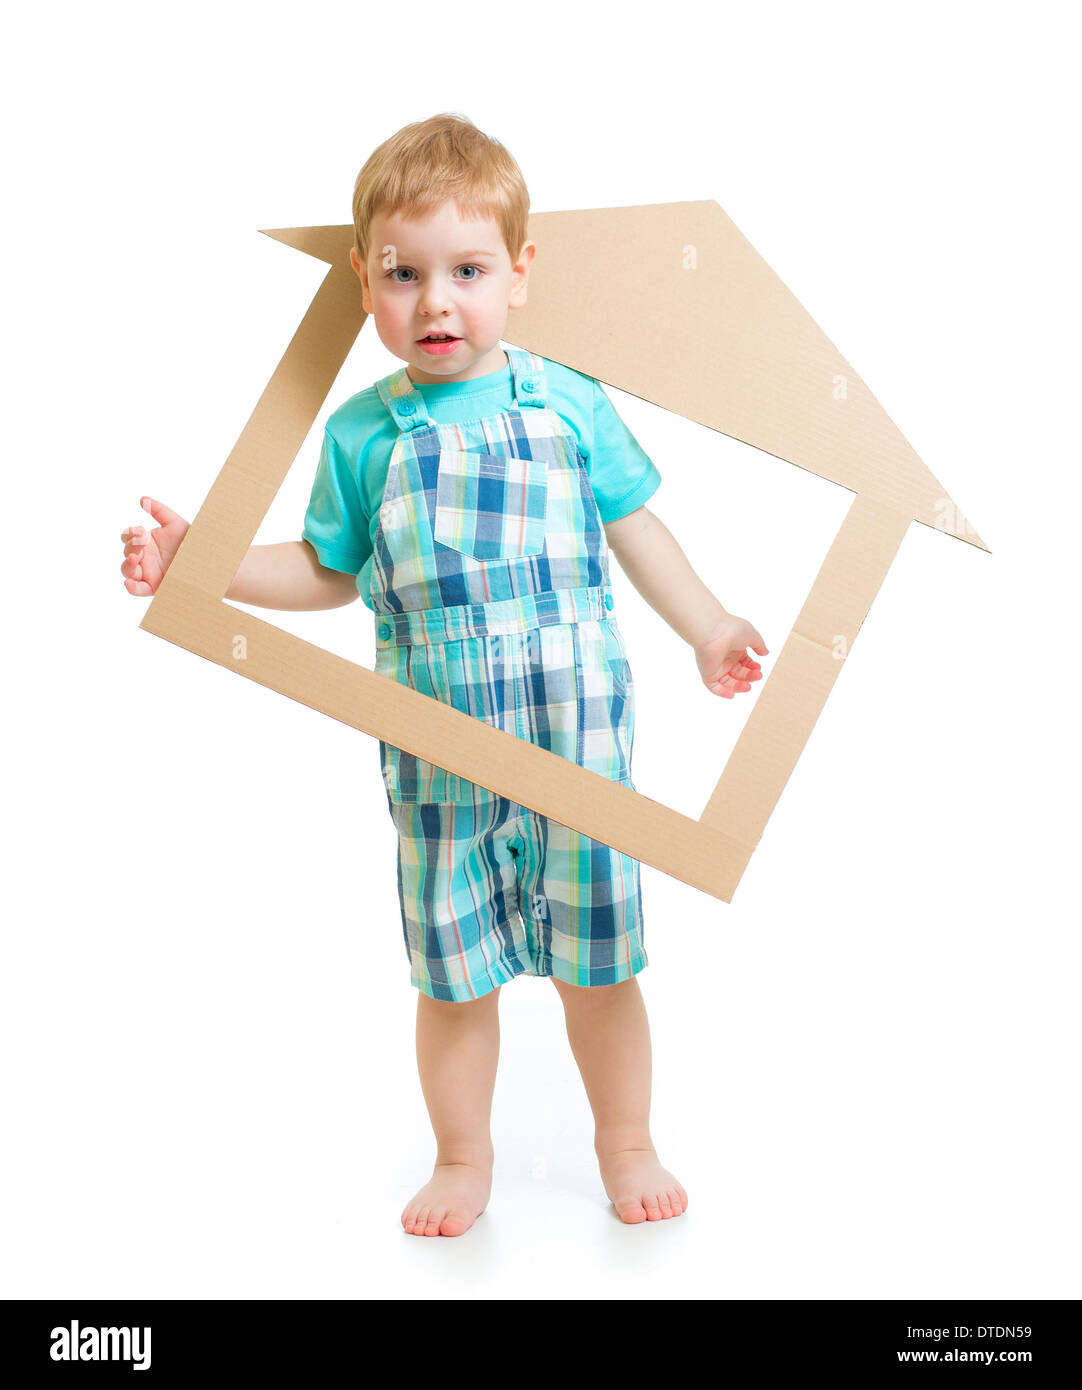 Adorable boy in own cardboard home or room concept Stock Photo